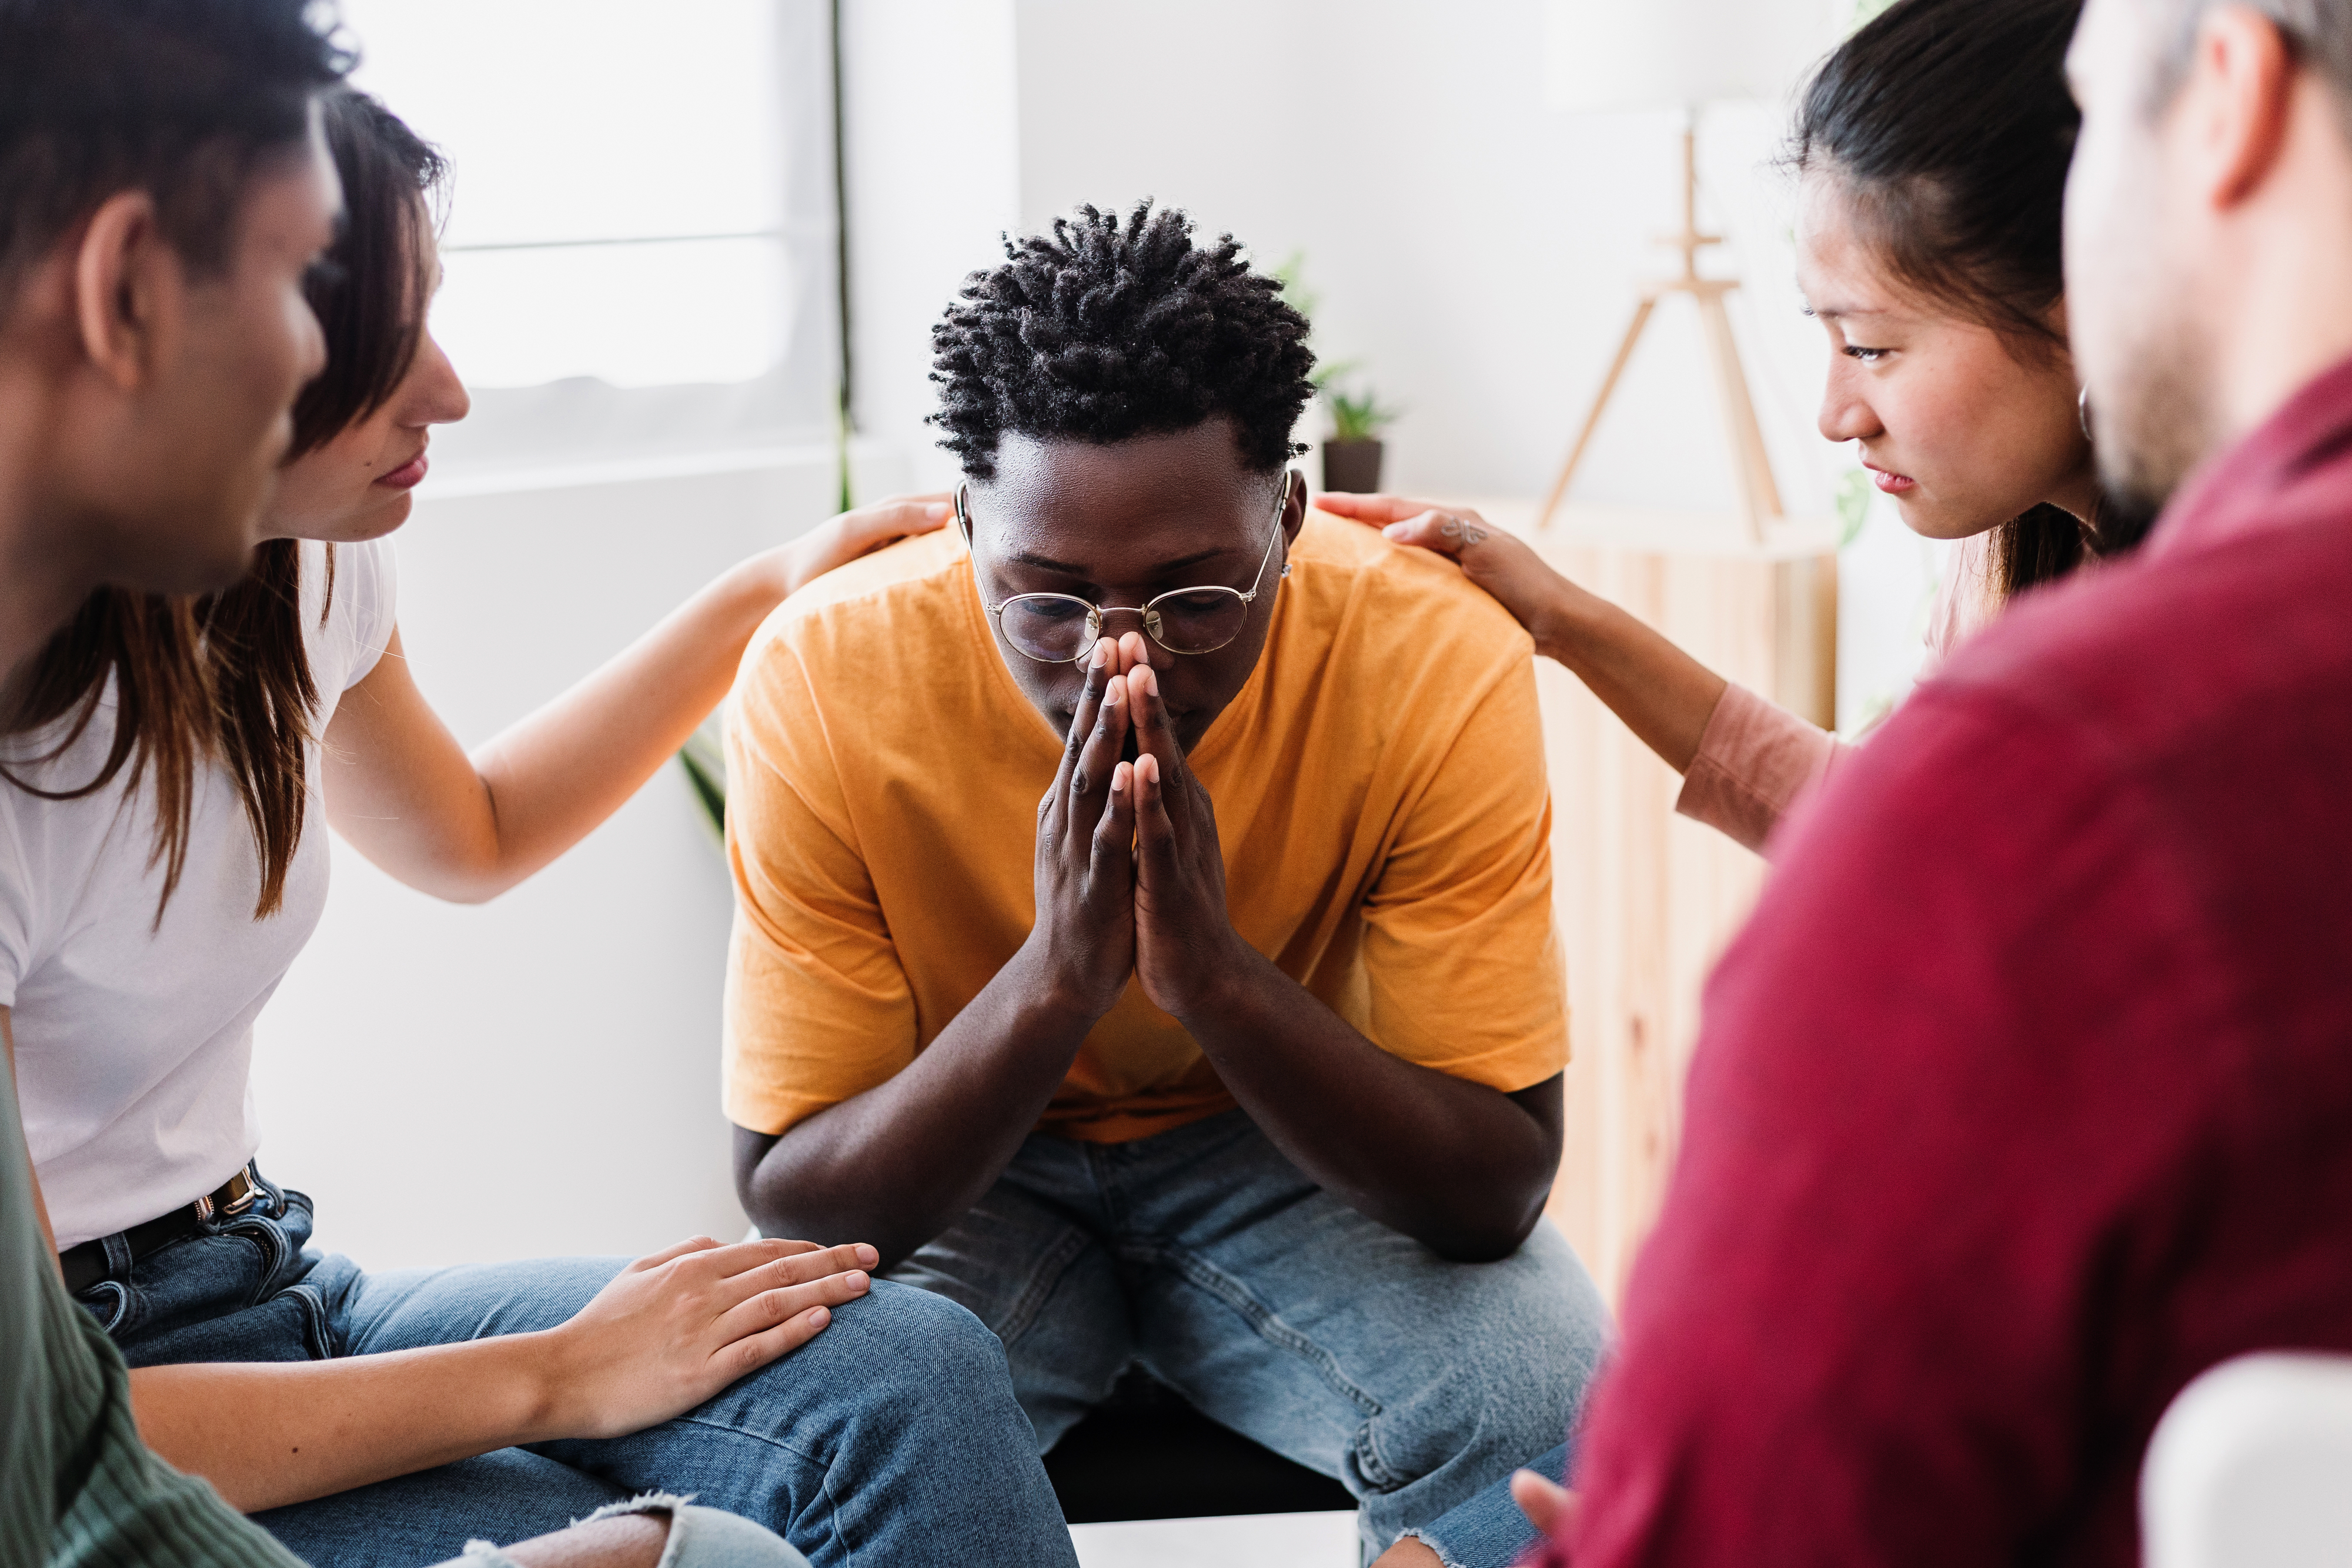 A group of five people sit in a circle, offering comfort and support to a distressed young man in the center who clasps his hands in front of his face